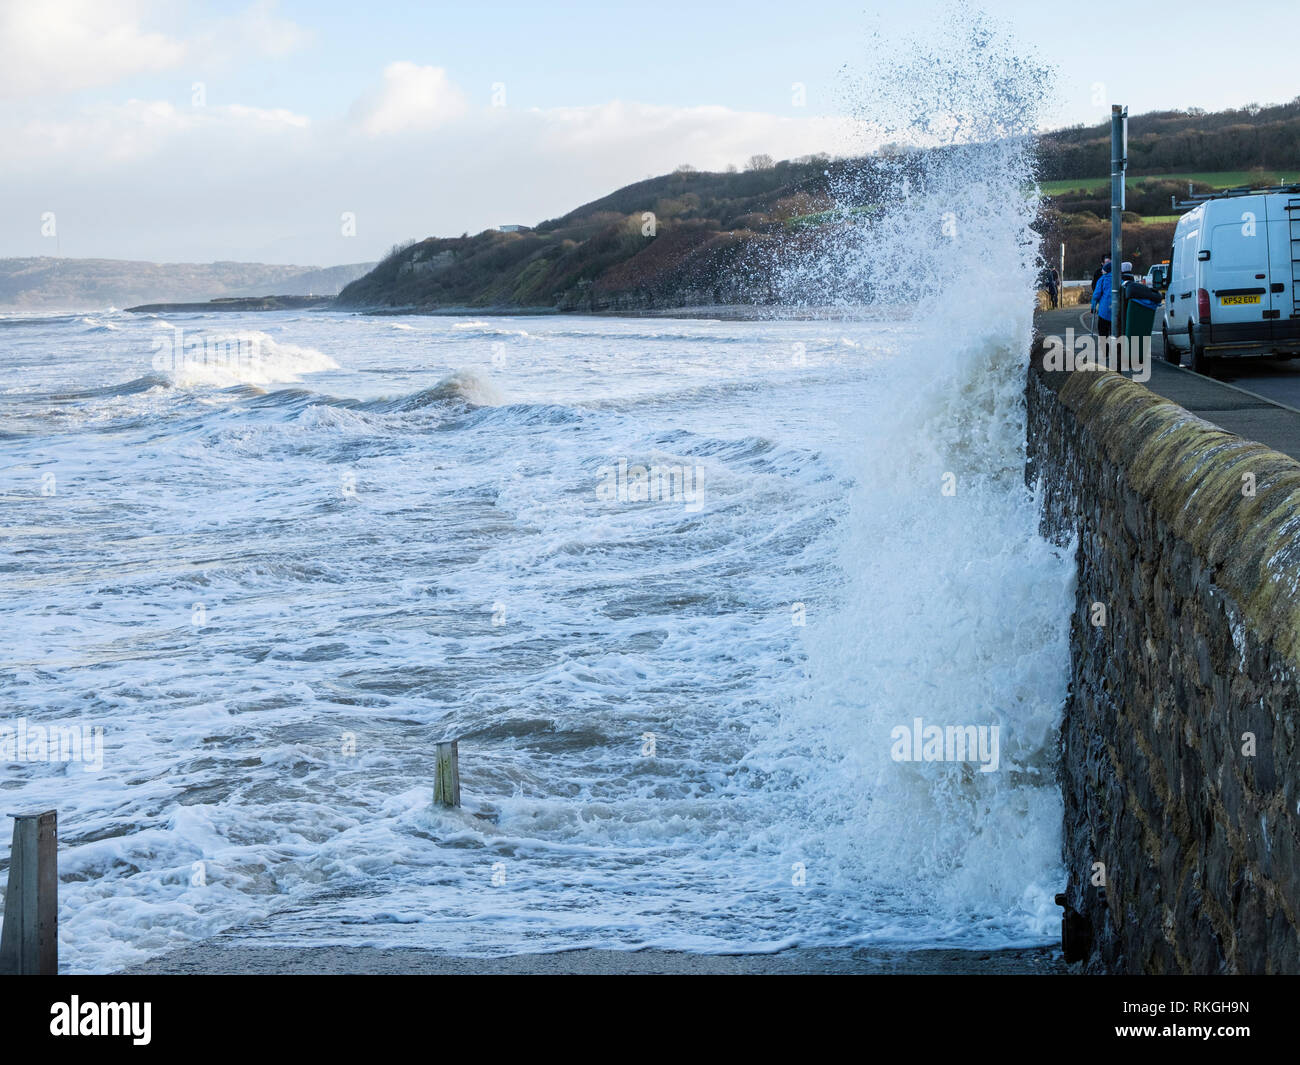 Rough sea and waves crashing against the sea wall on seafront during windy weather at high tide. Benllech, Isle of Anglesey, Wales, UK, Britain Stock Photo